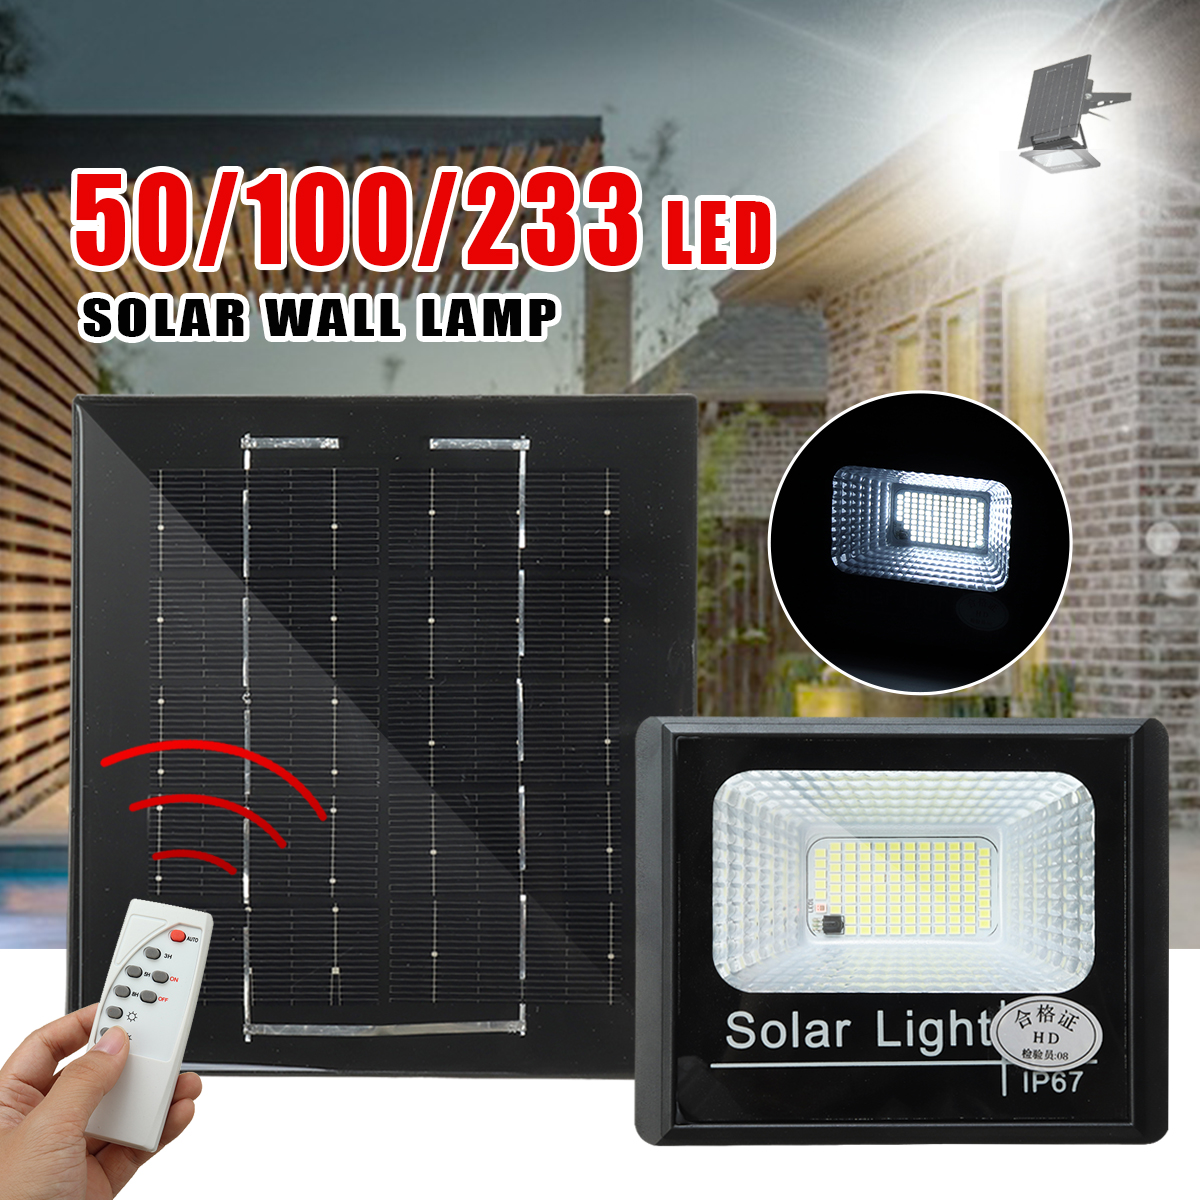 LED-Solar-Flood-Light-with-Remote-Control-Wall-Lamp-IP67-Waterproof-Solar-Powered-Lamp-for-Outdoor-G-1880477-1